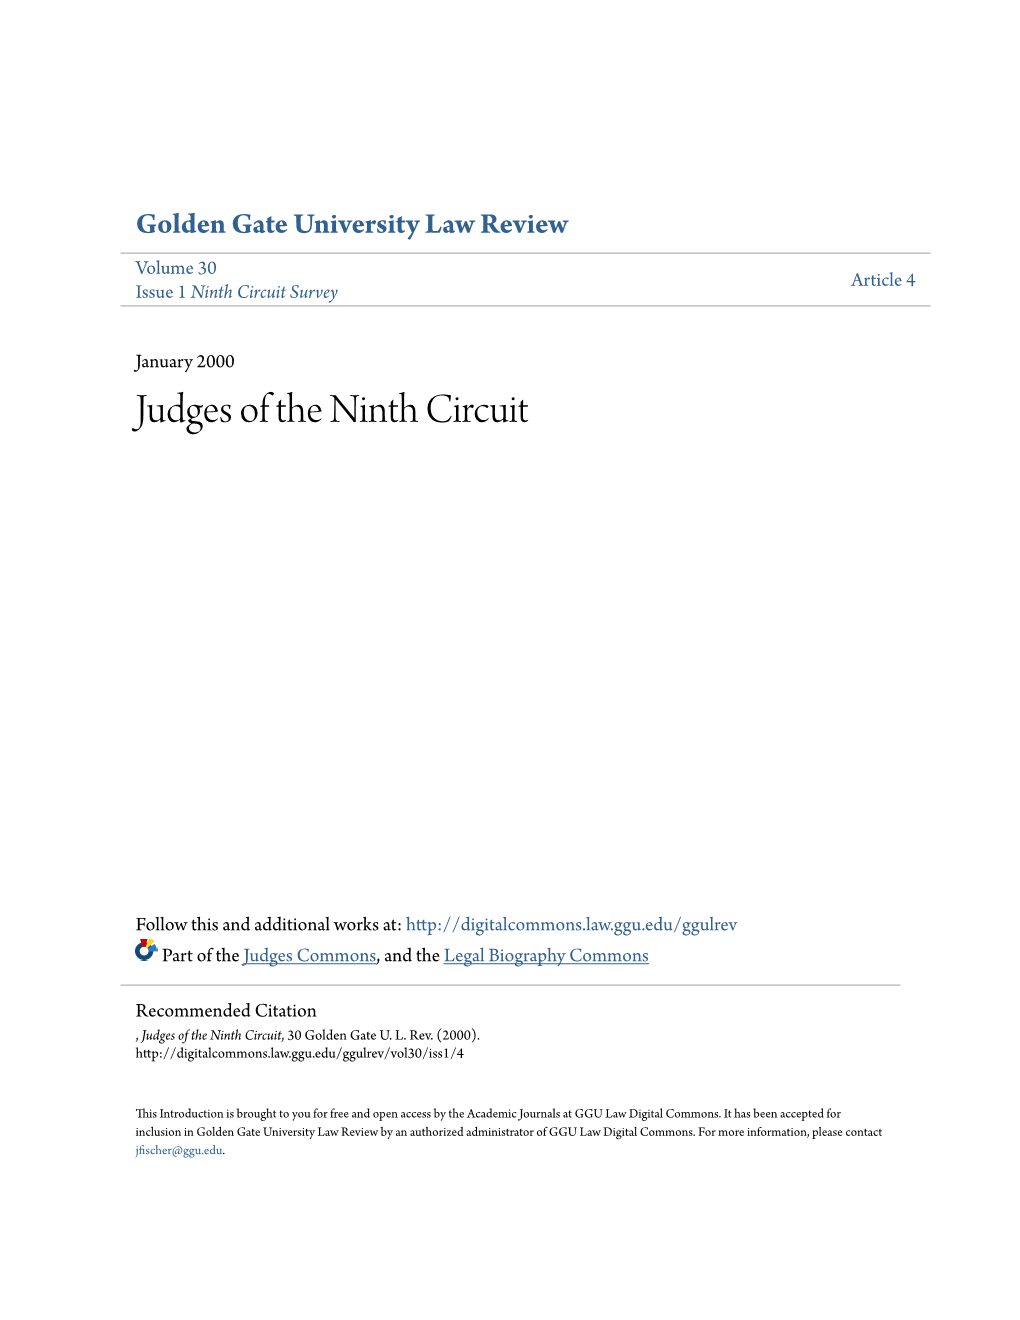 Judges of the Ninth Circuit